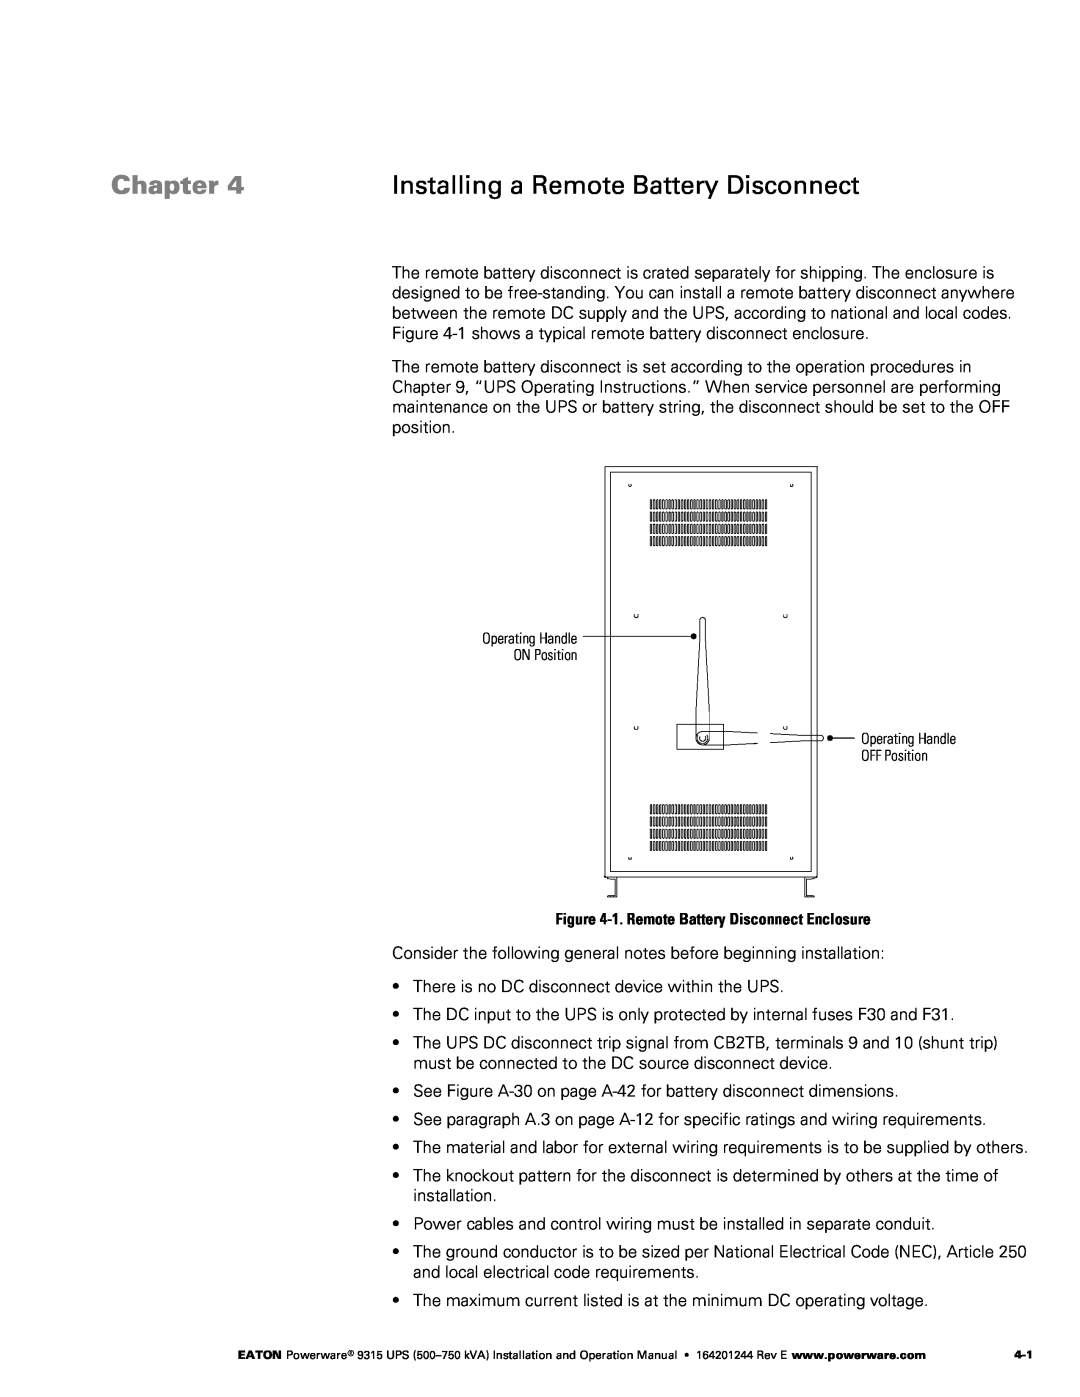 Powerware Powerware 9315 operation manual Installing a Remote Battery Disconnect, Chapter 